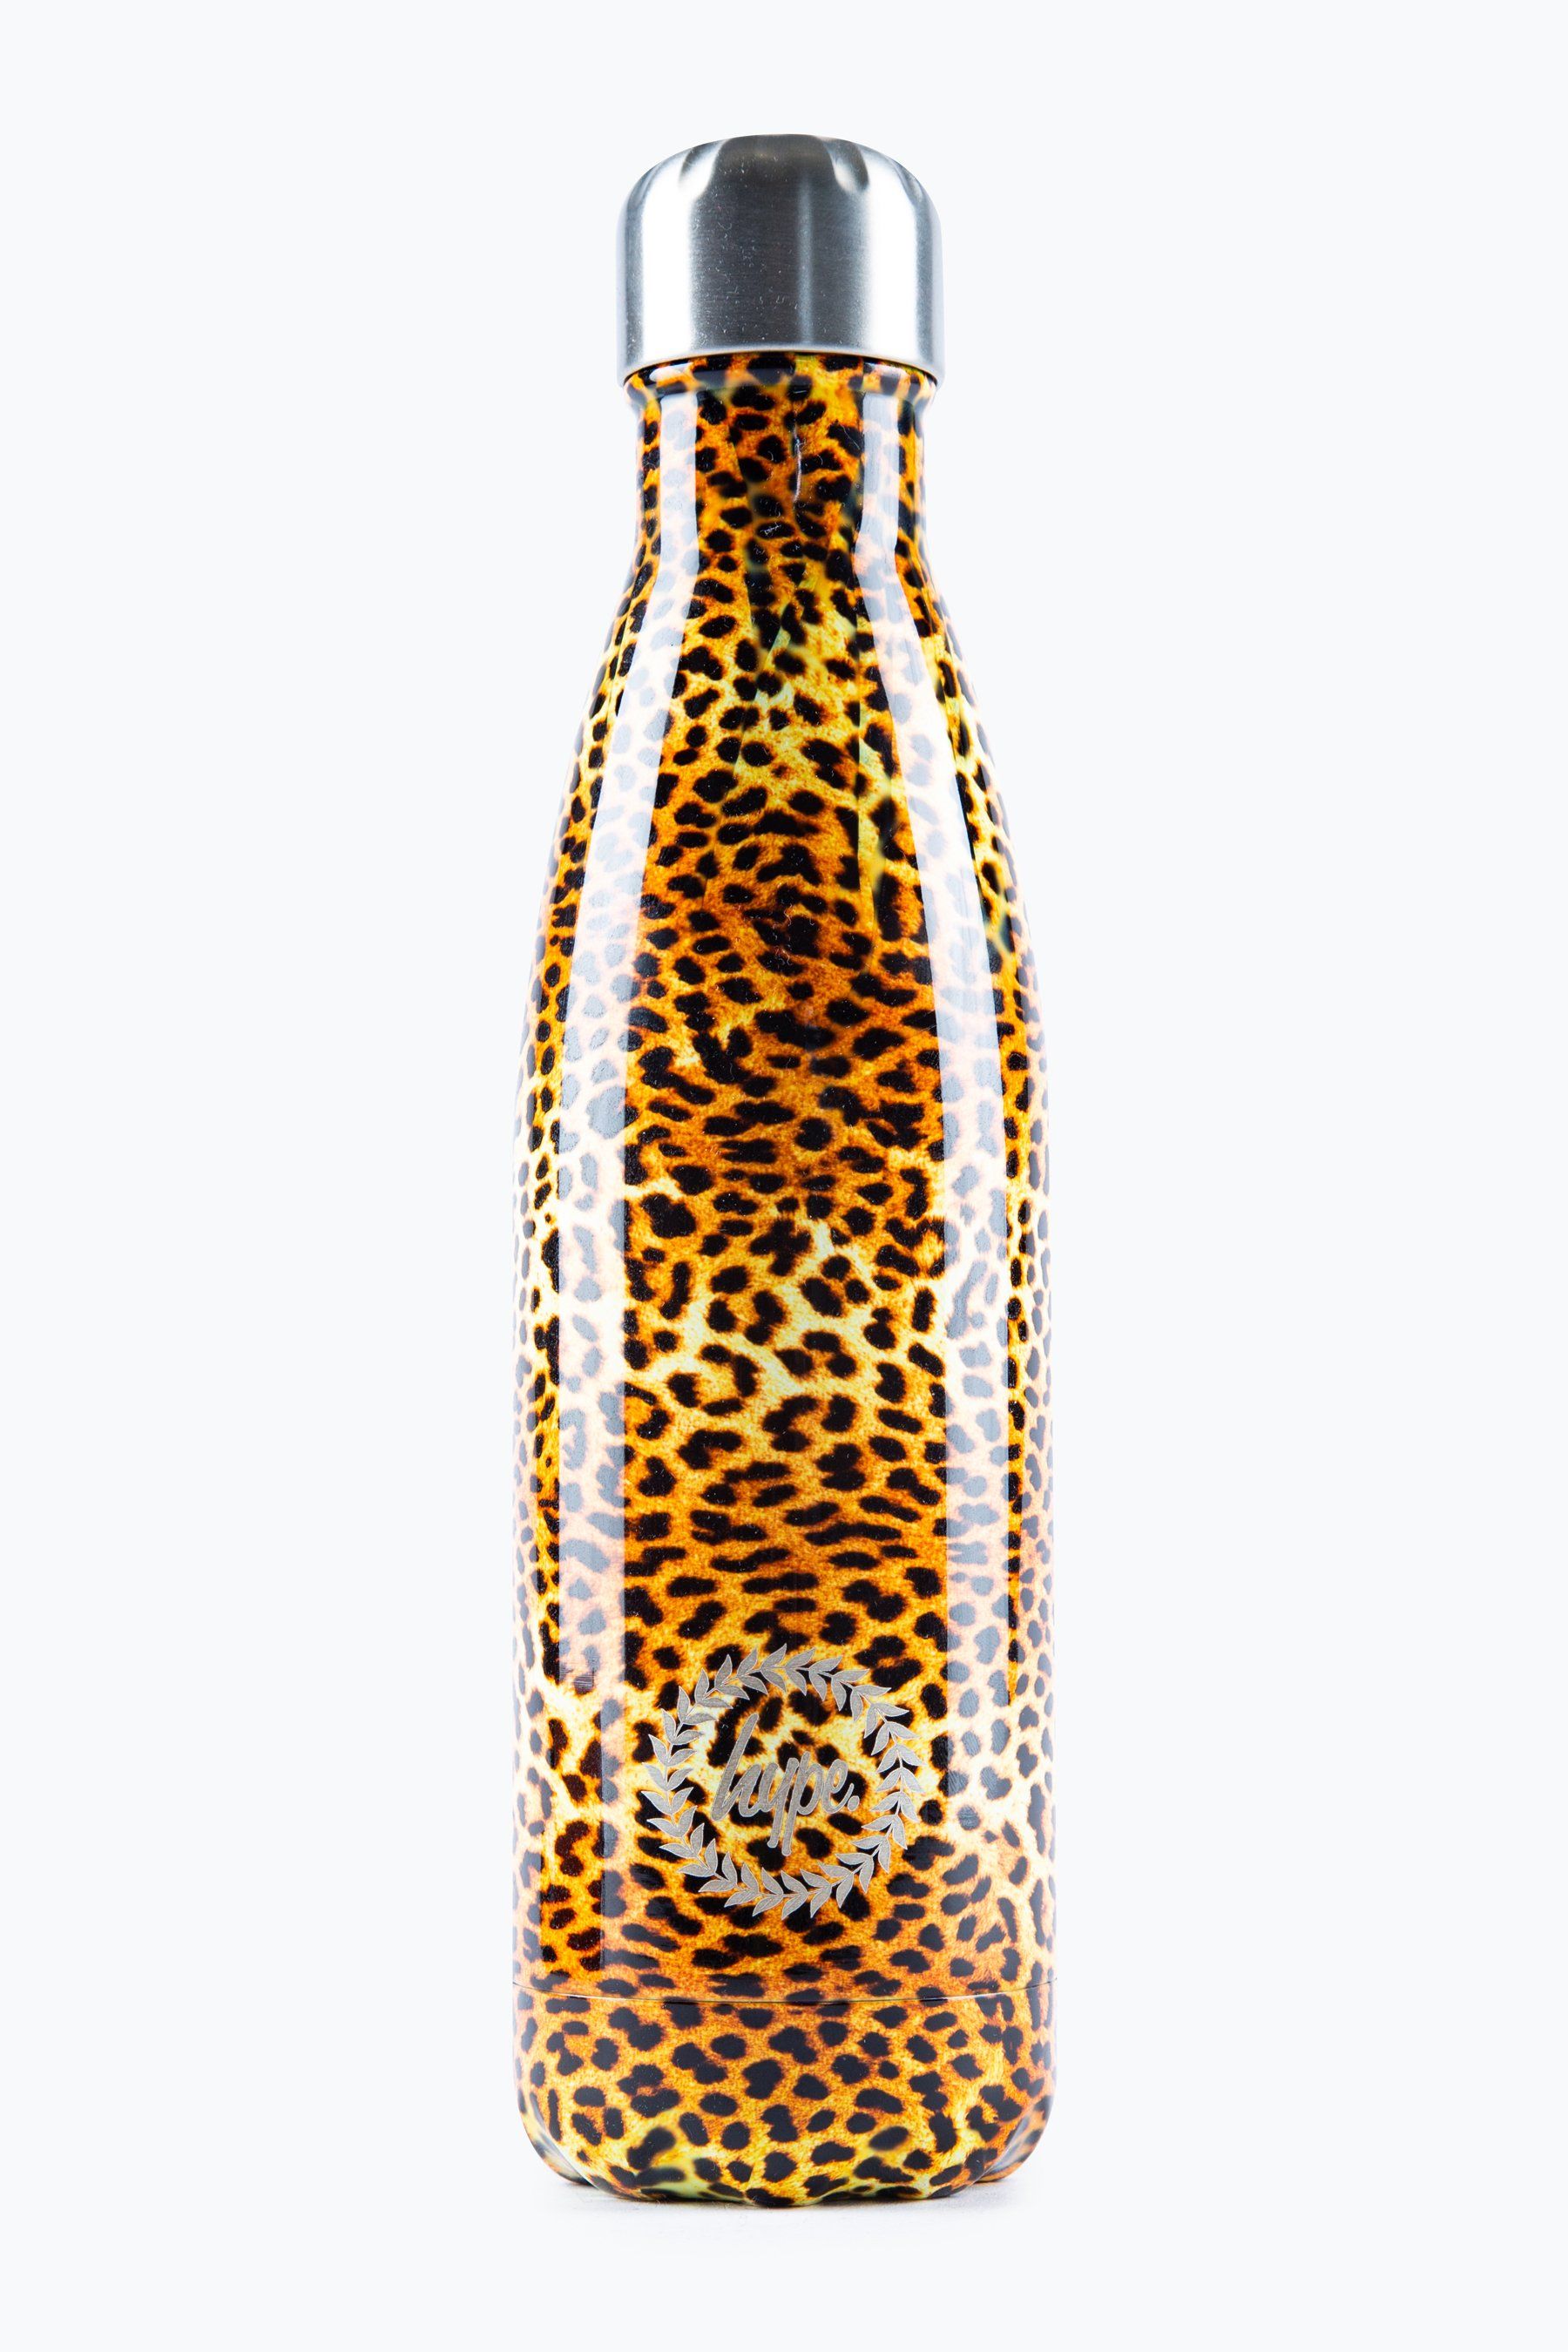 Keeping you hydrated, in style. Meet the HYPE. Leopard Reusable Water Bottle, perfect for when you're on the go. Designed in Aluminium to ensure your water stays ice-cold and for chillier days, keeping your oat milk latte warm for longer. Reuse it again and again with an airtight screw lid prevents spills. Designed in an all-over leopard inspired print in a neutral colour palette. Why not grab one of our lunch bags or backpacks with a bottle holder to complete the look. Hand wash only.